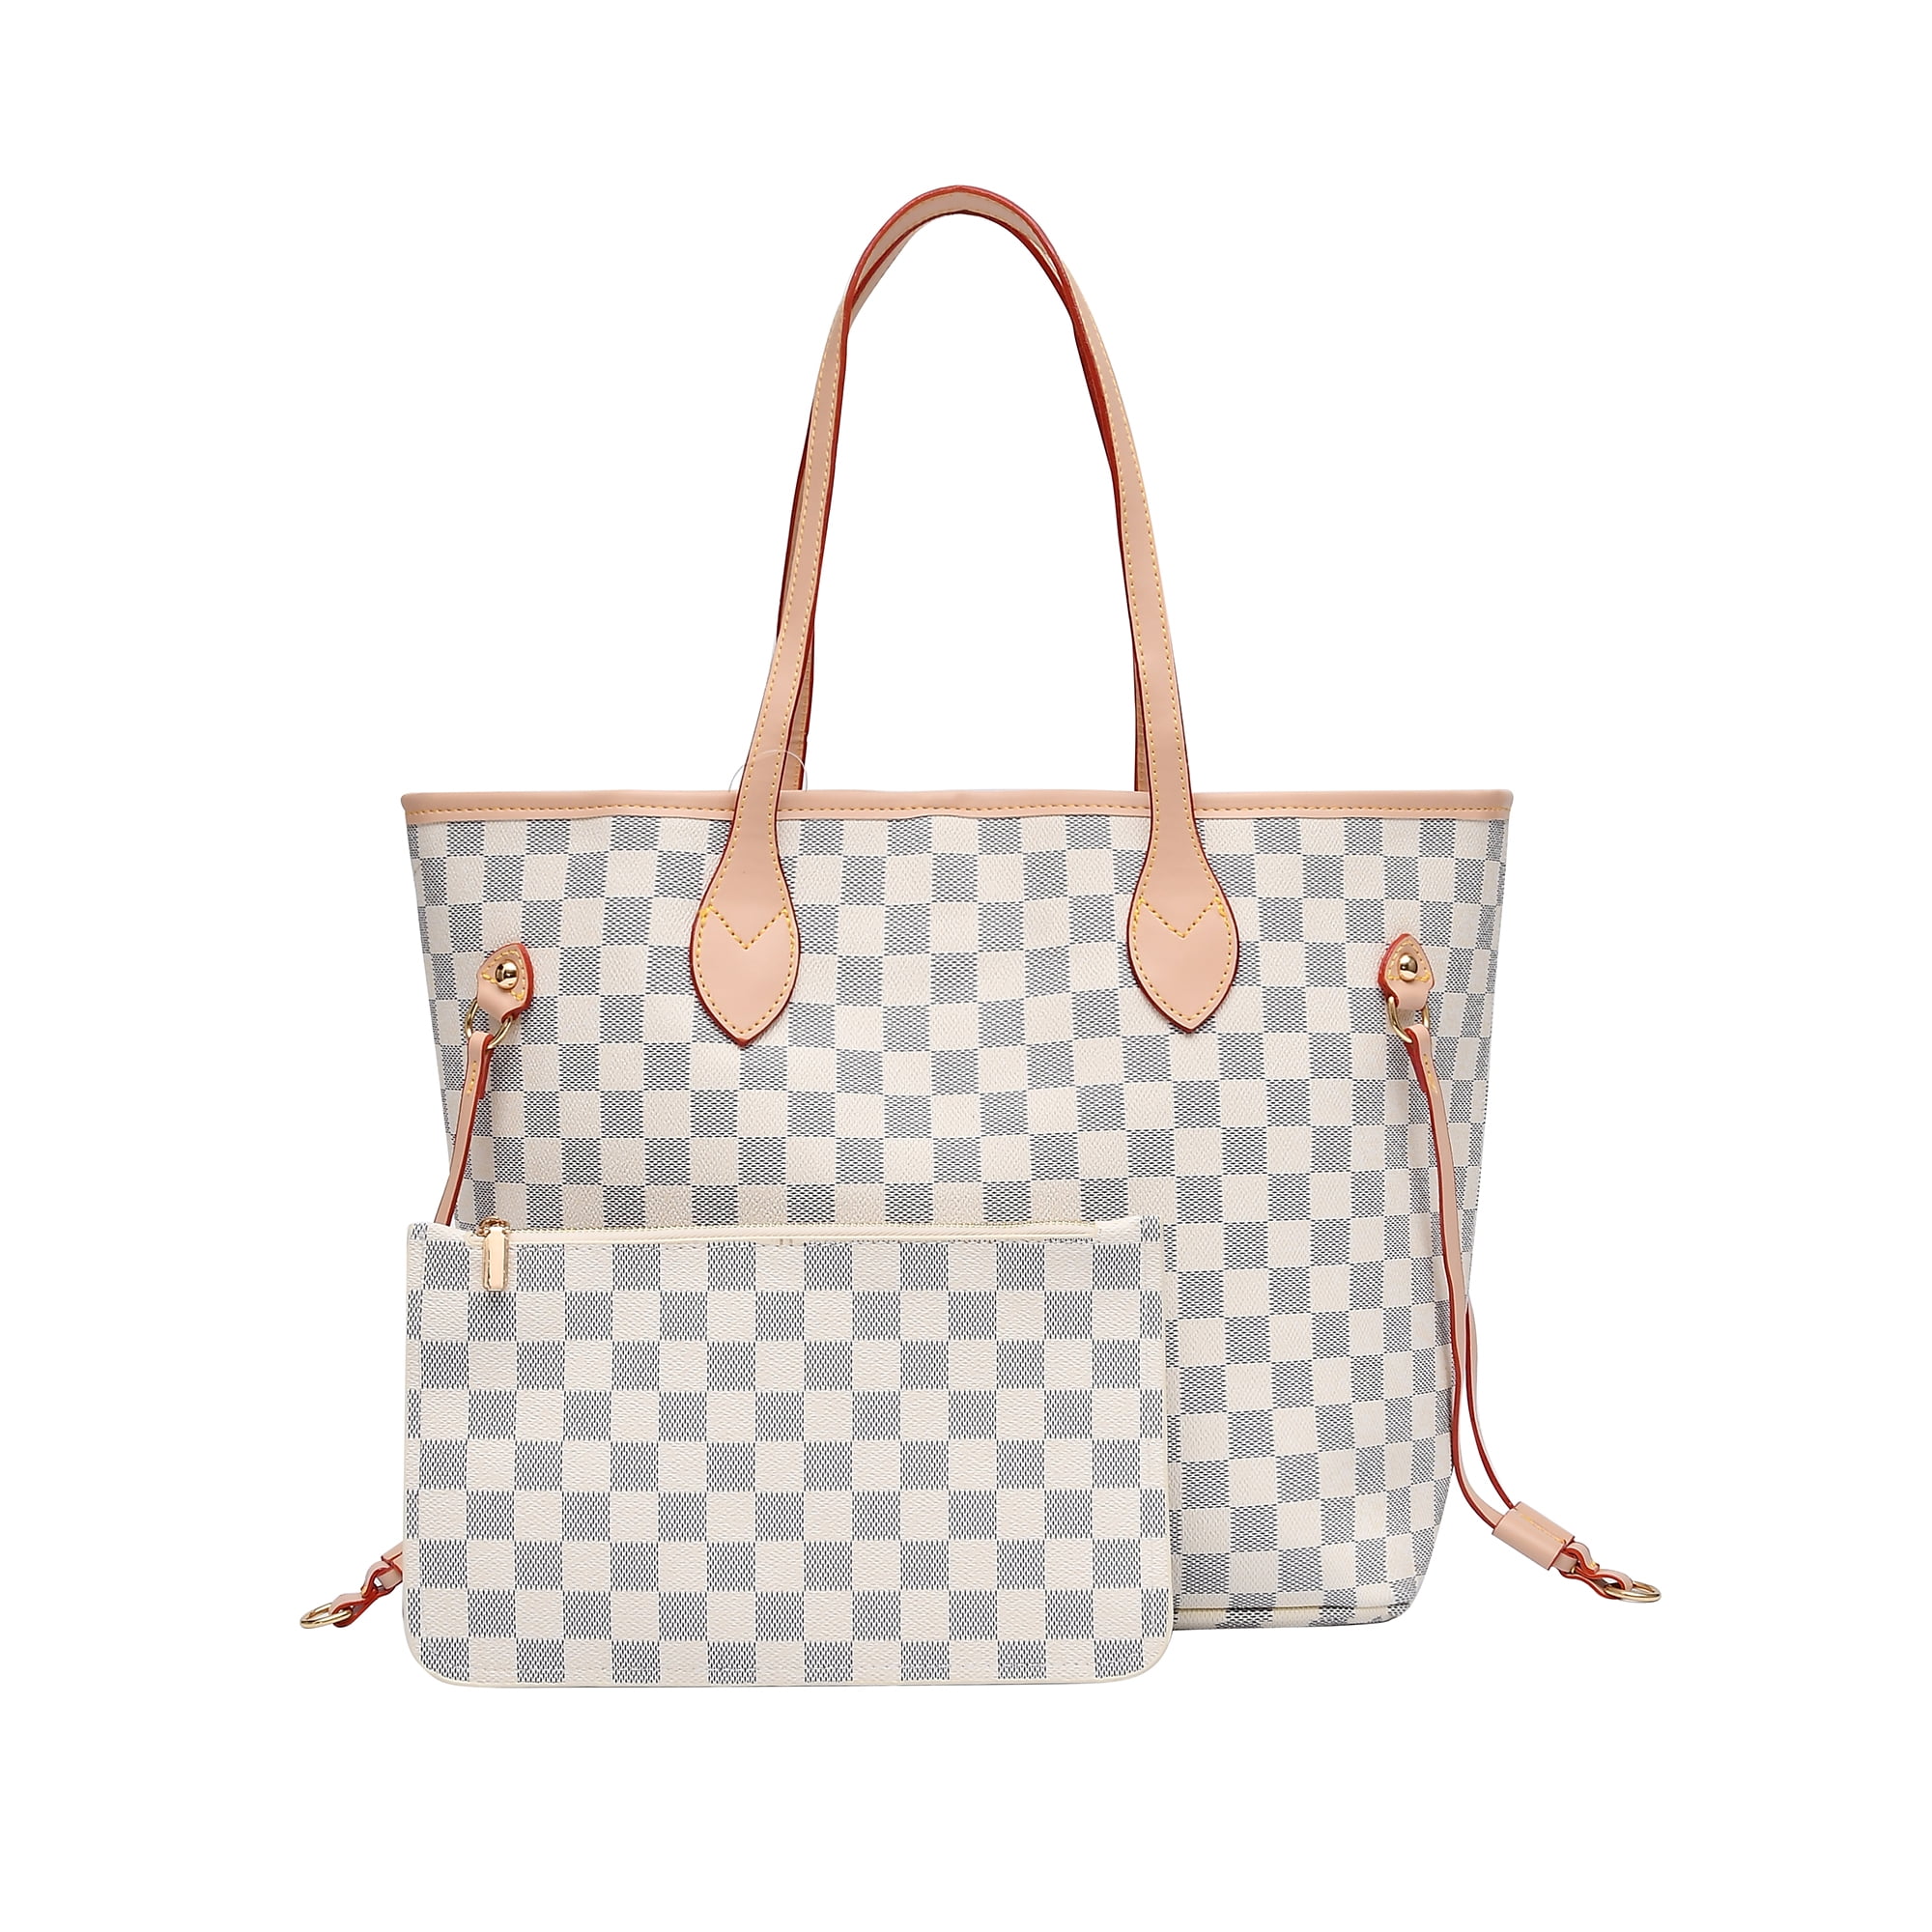 T.Sheep Checkered Tote Shoulder Bags With Inner Pouch,PU Vegan